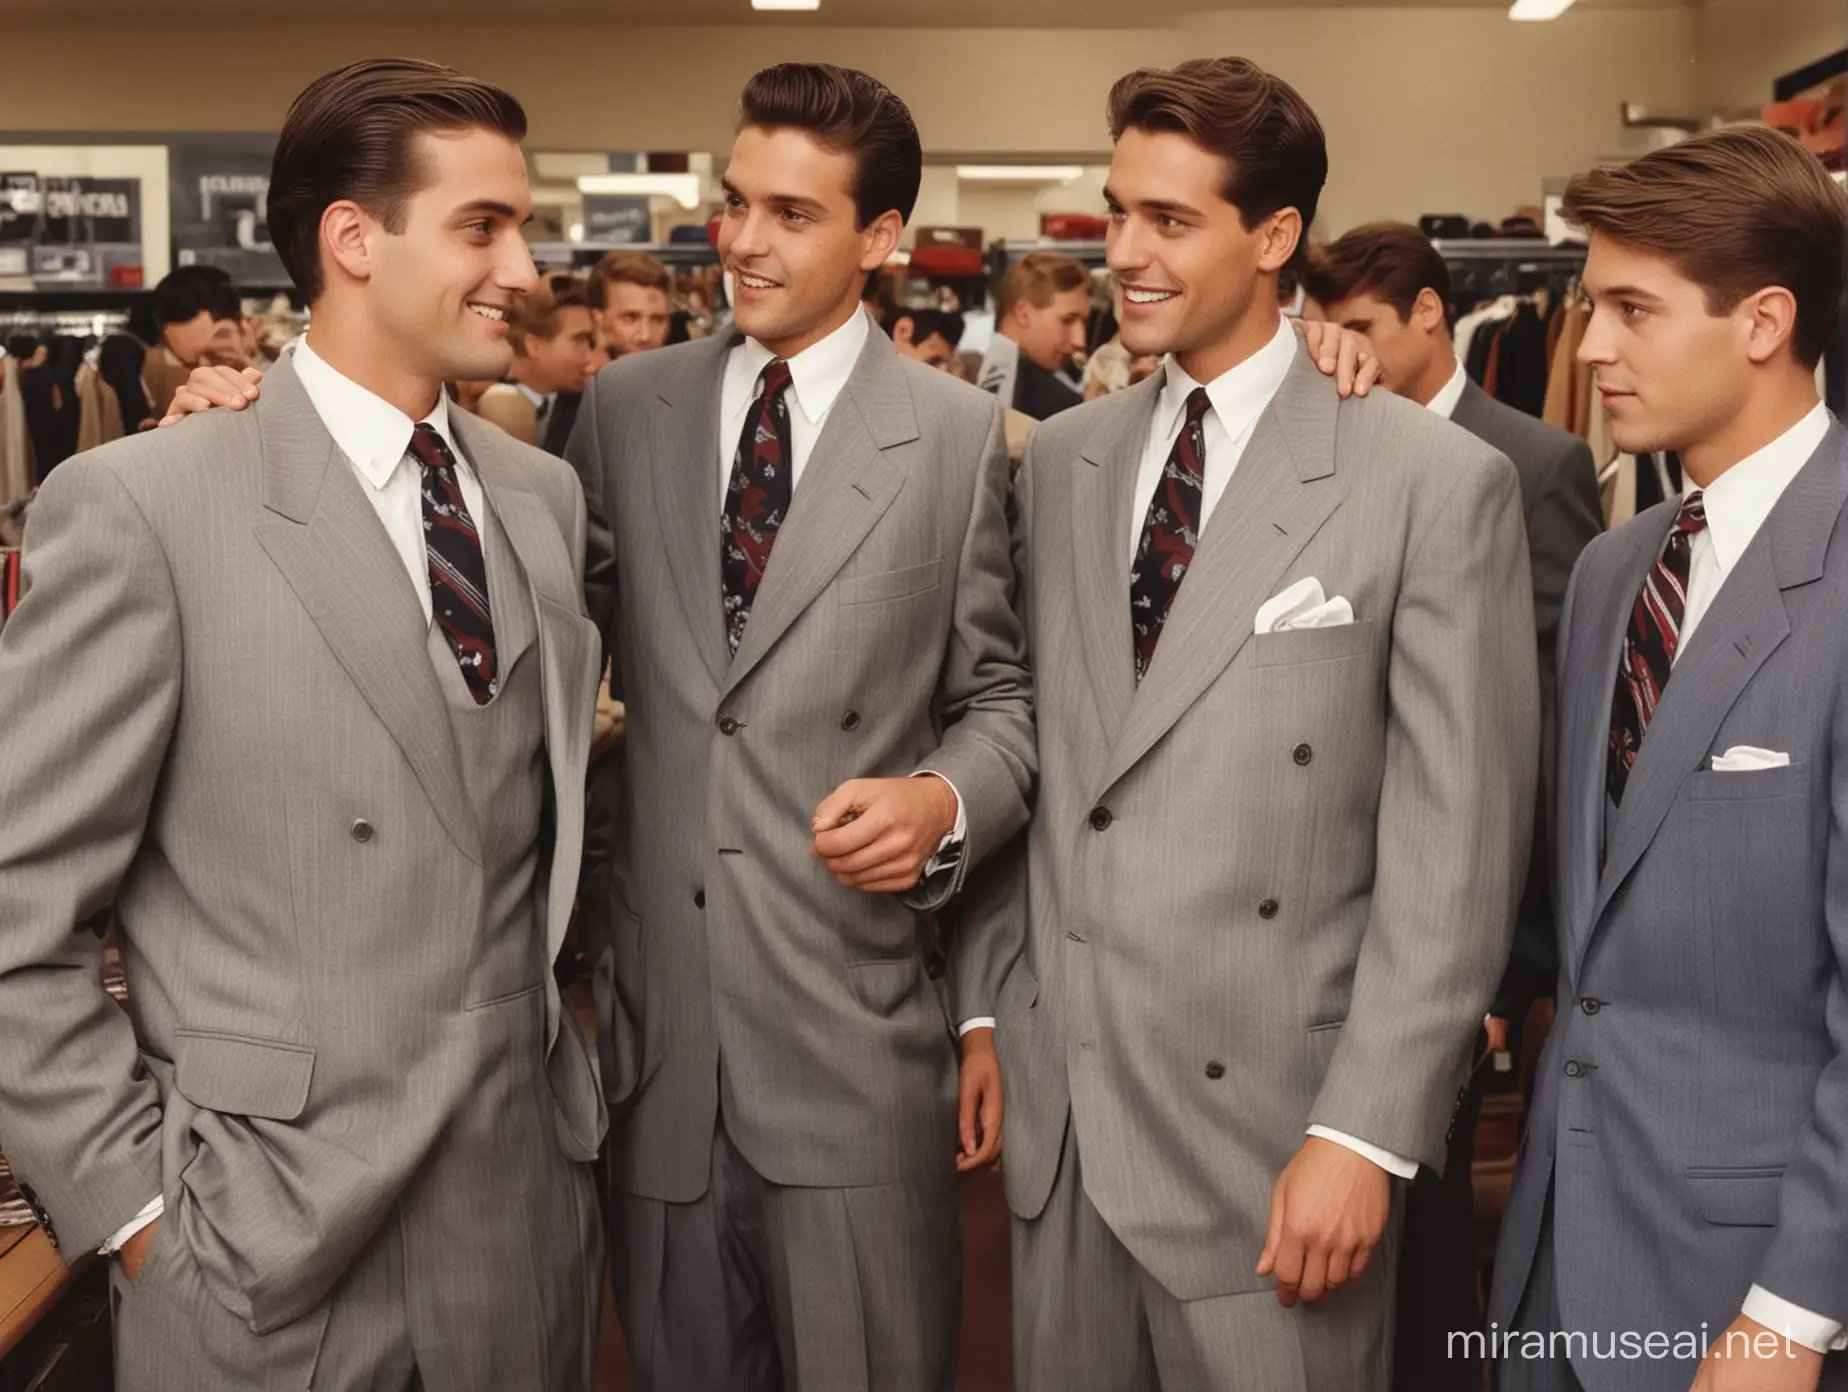 Men Trying Affordable Oversized Suits at JCPenney